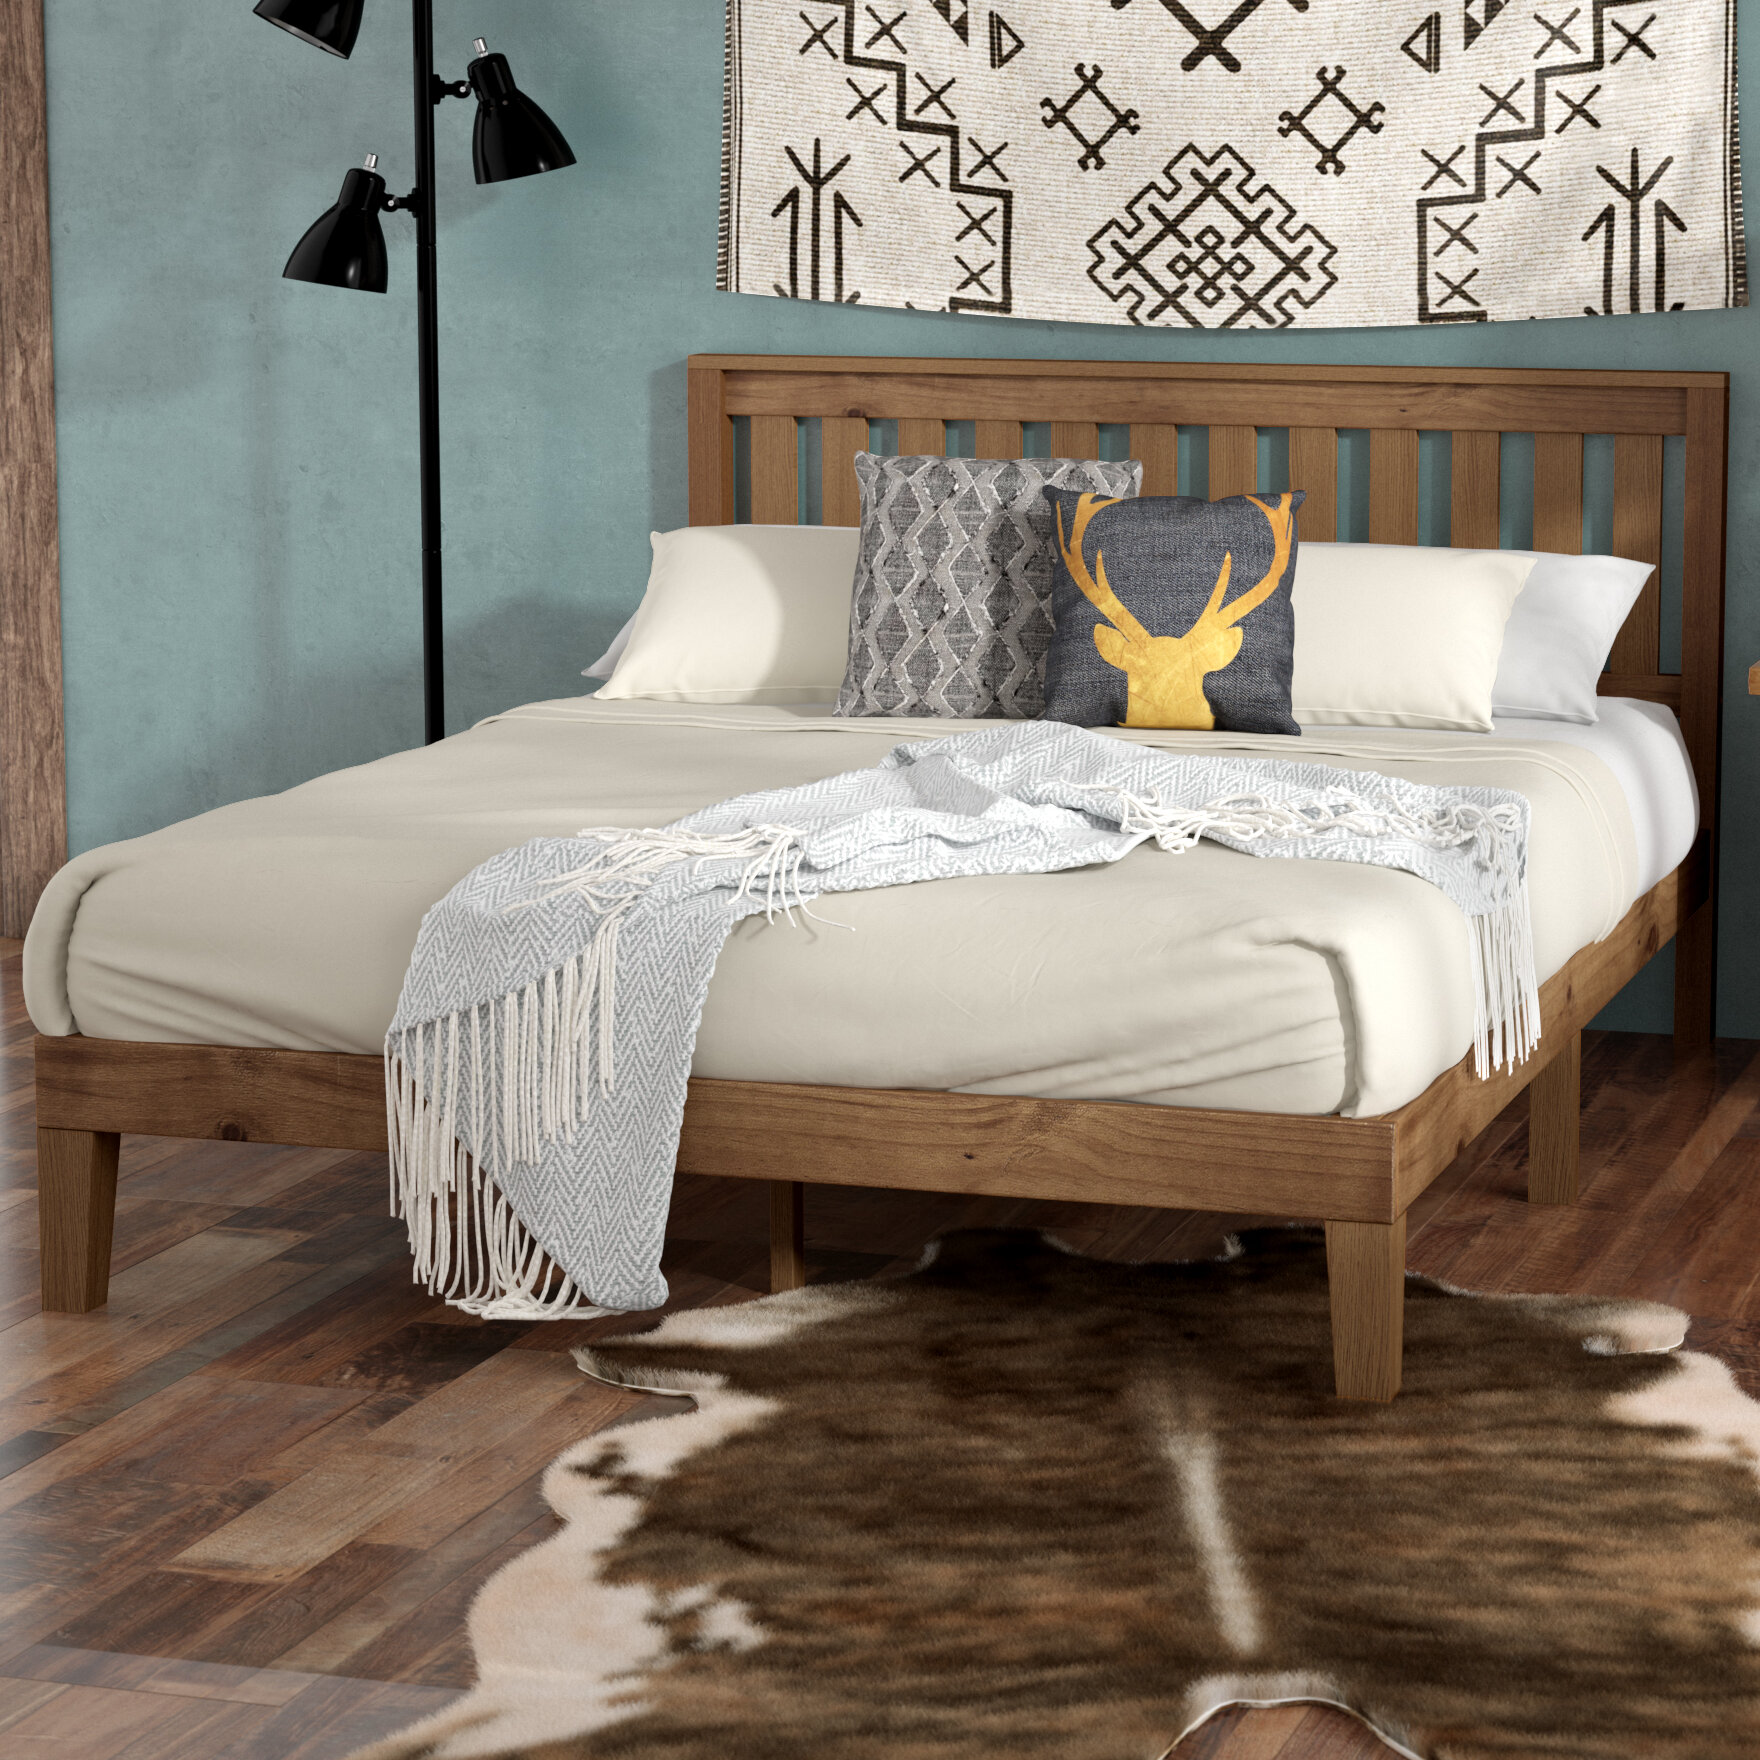 Featured image of post Wood Bed Frame King Single - Grey (63) blue (43) green (32) pink (22) yellow (13) beige (12) teal (10) light wood (9) black (5) dark wood (5) brass (2) copper (2) taupe (2) white (2) natural (1) orange (1).